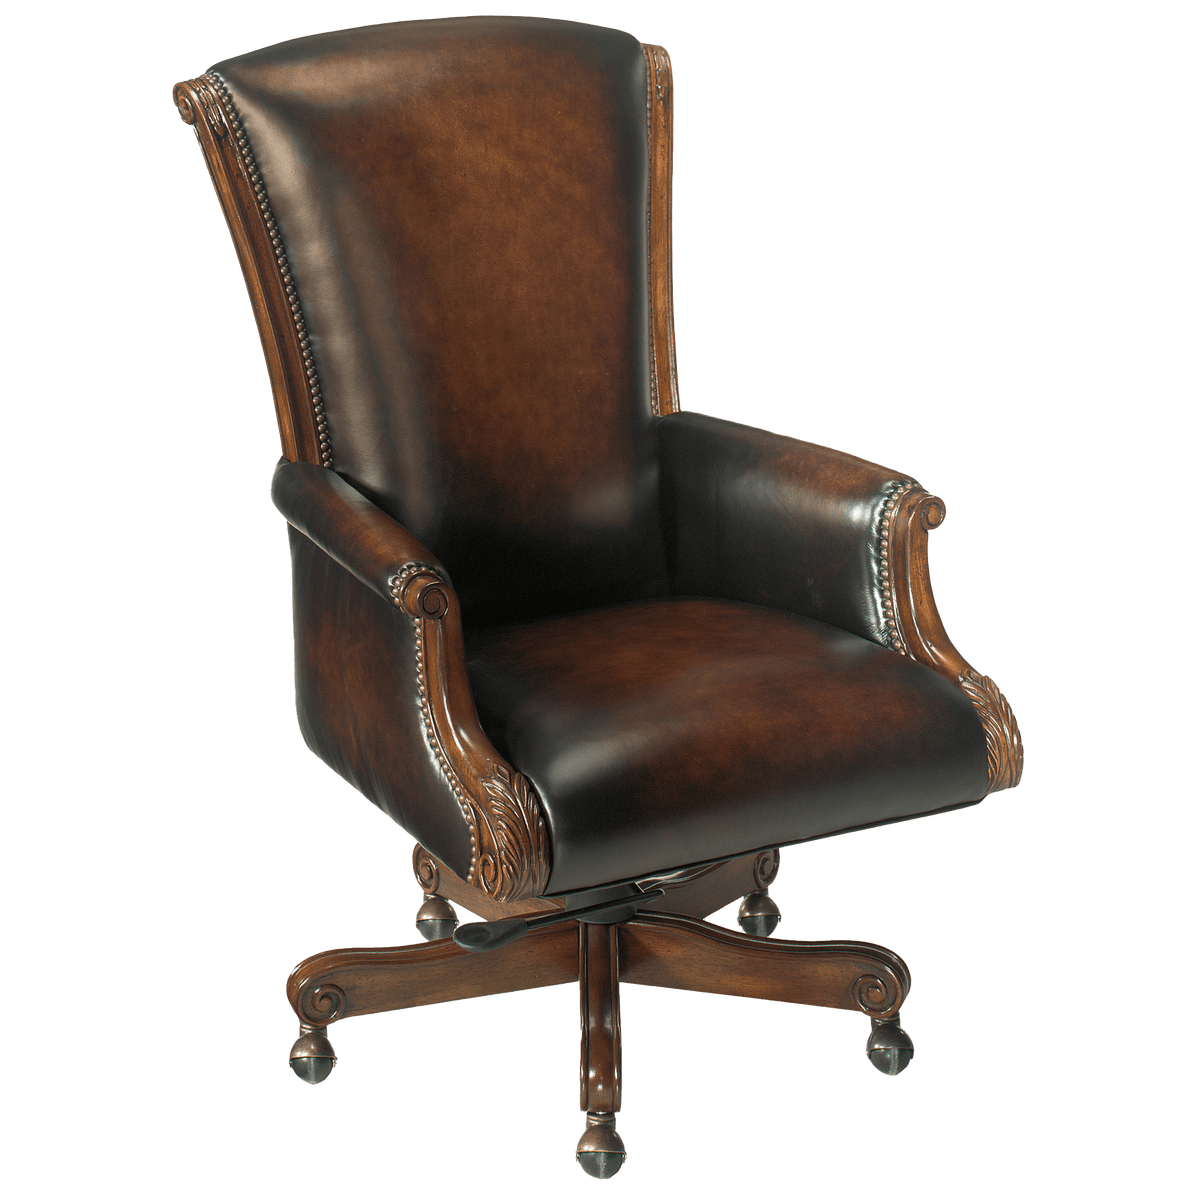 Stetson Leather Office Chair, Brown - Coja